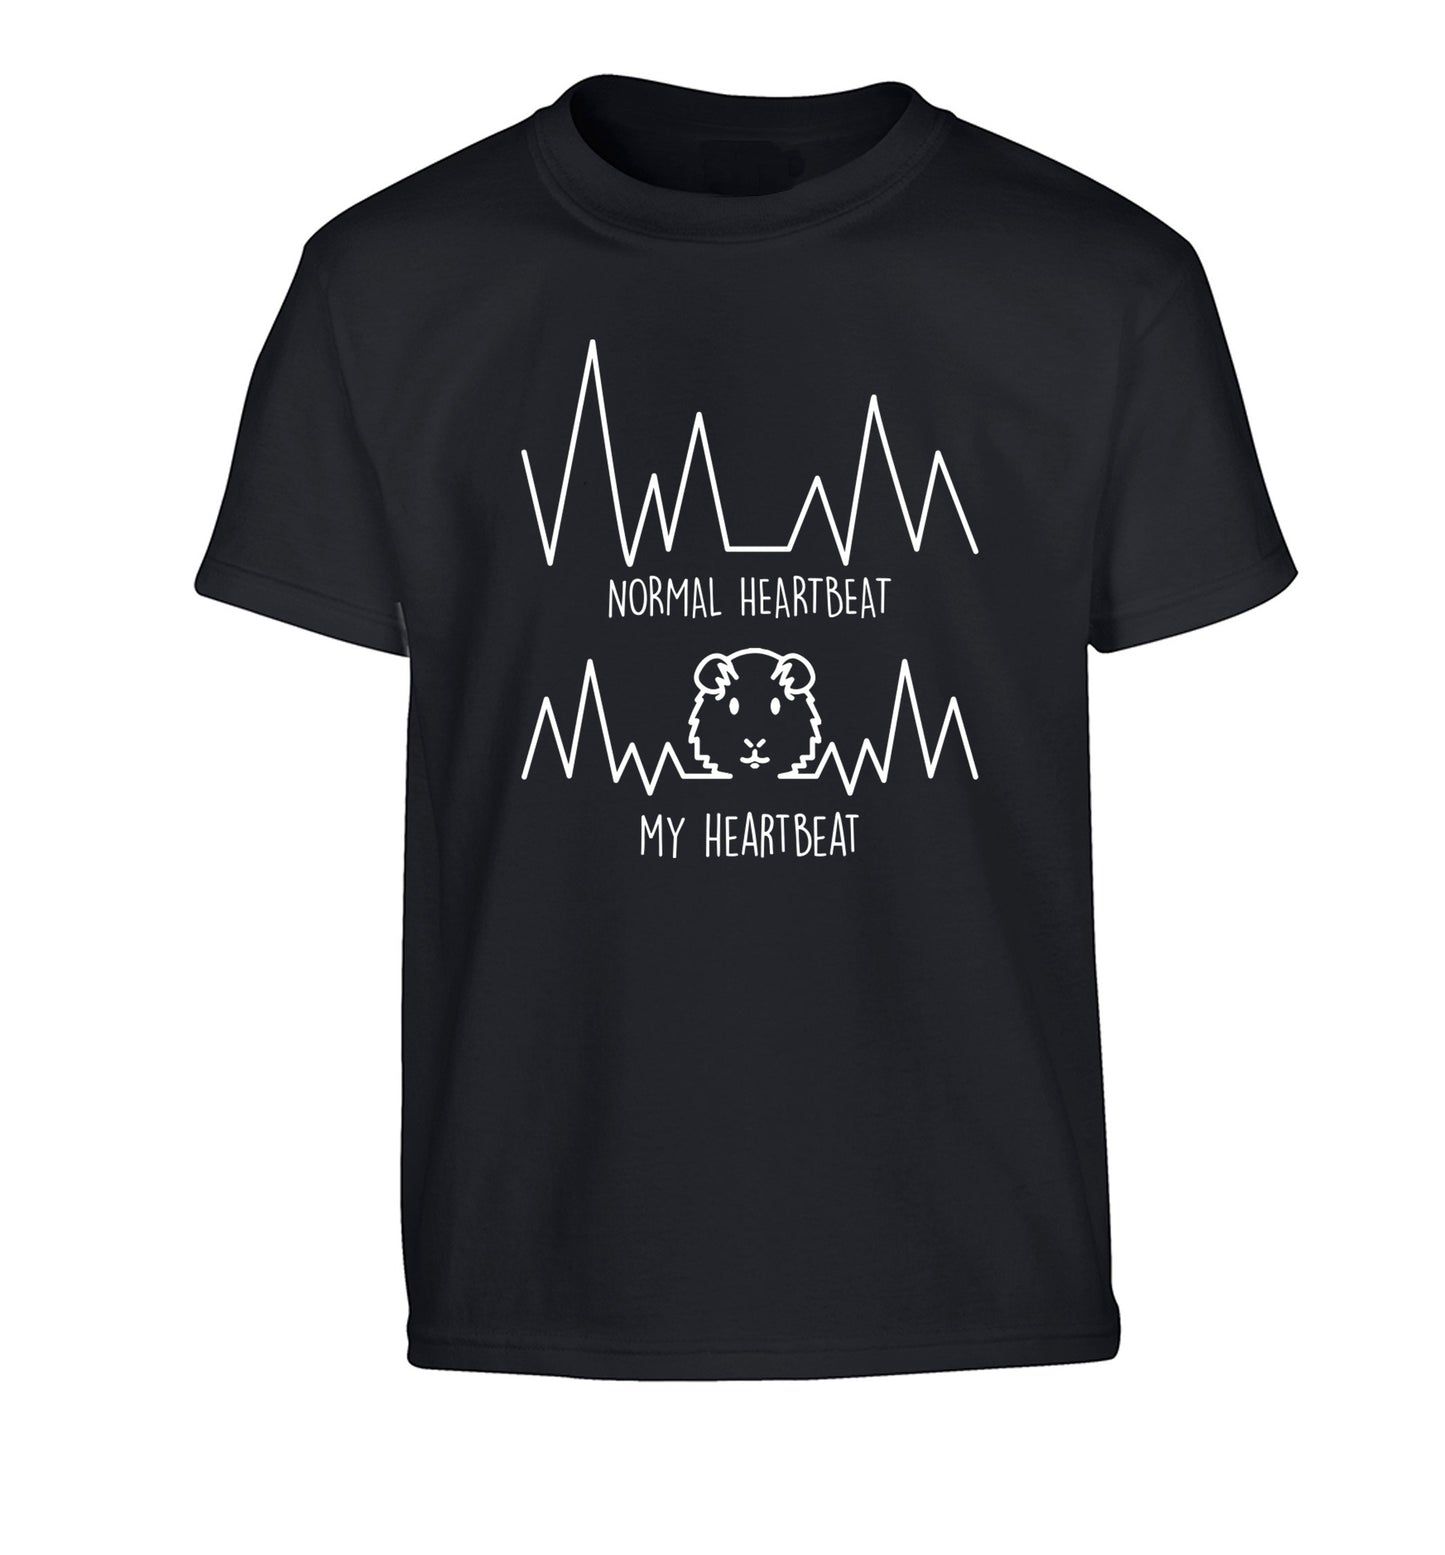 Normal heartbeat vs my heartbeat guinea pig lover Children's black Tshirt 12-14 Years